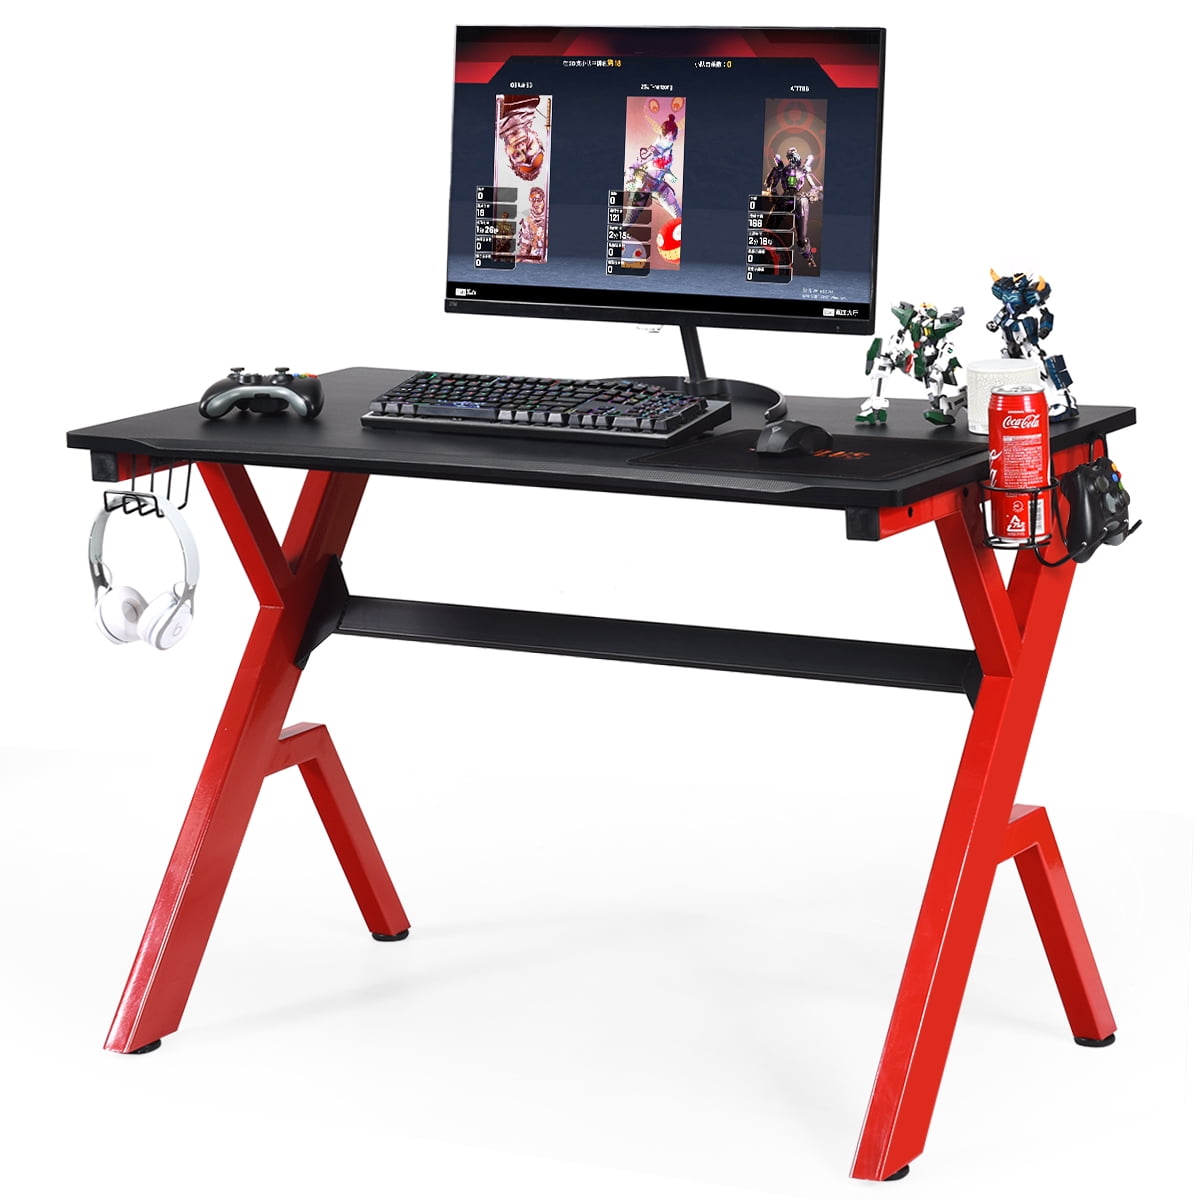 Ergonomic Gaming Desk Computer Table with Headphone Cup Holder Cable Management